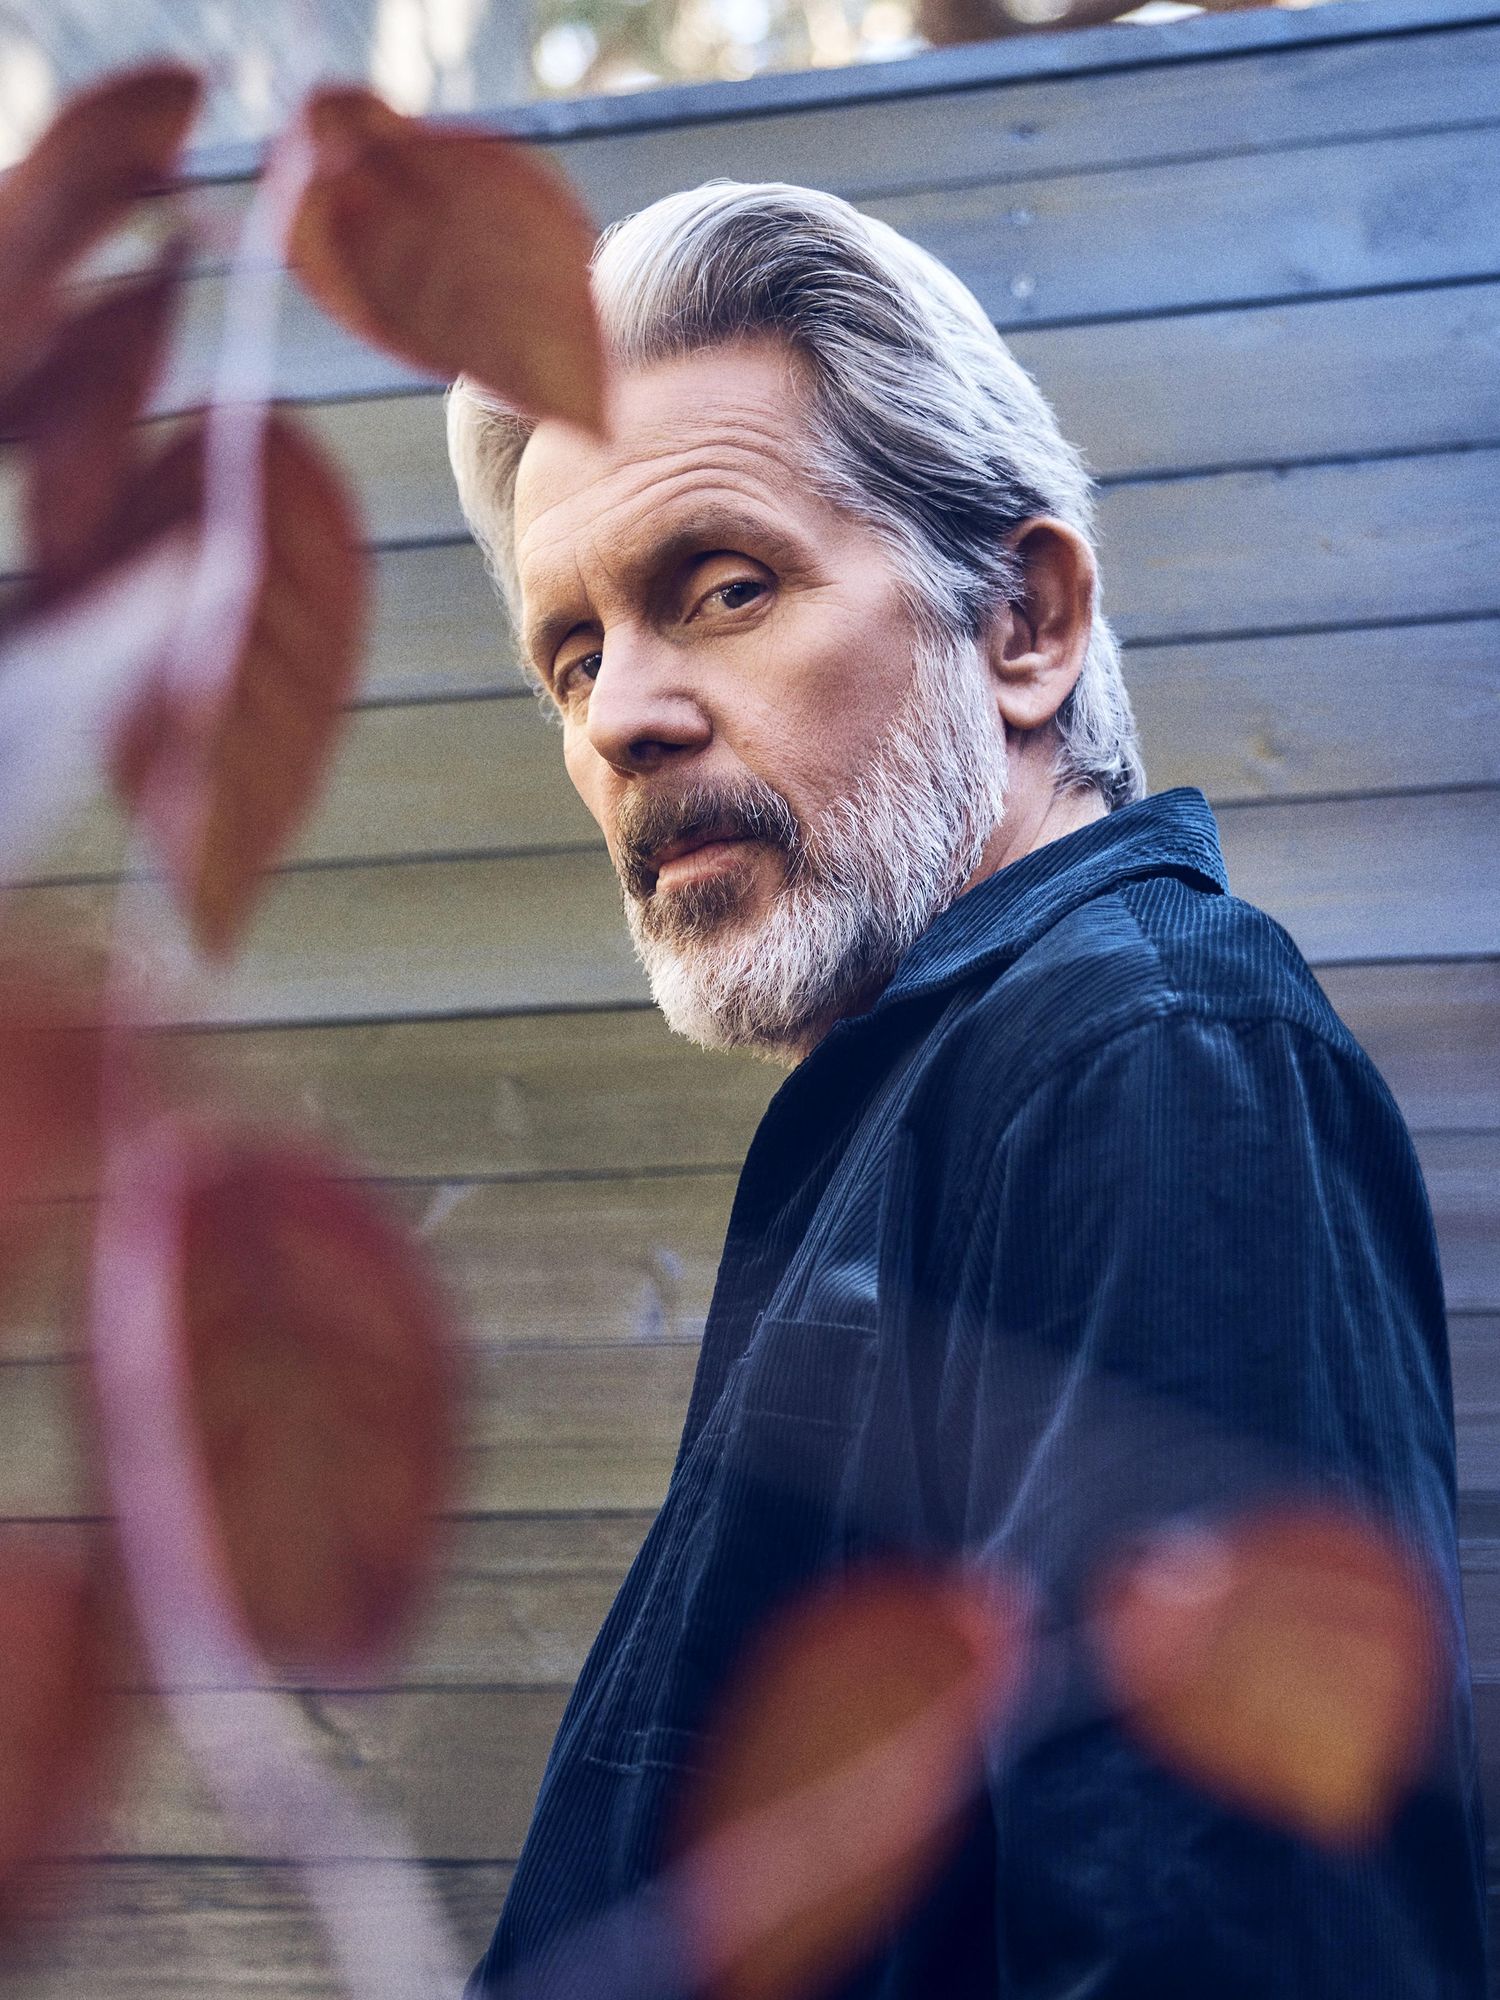 Actor Gary Cole from NCIS leans against a wooden fence wearing a dark blue corduroy jacket.